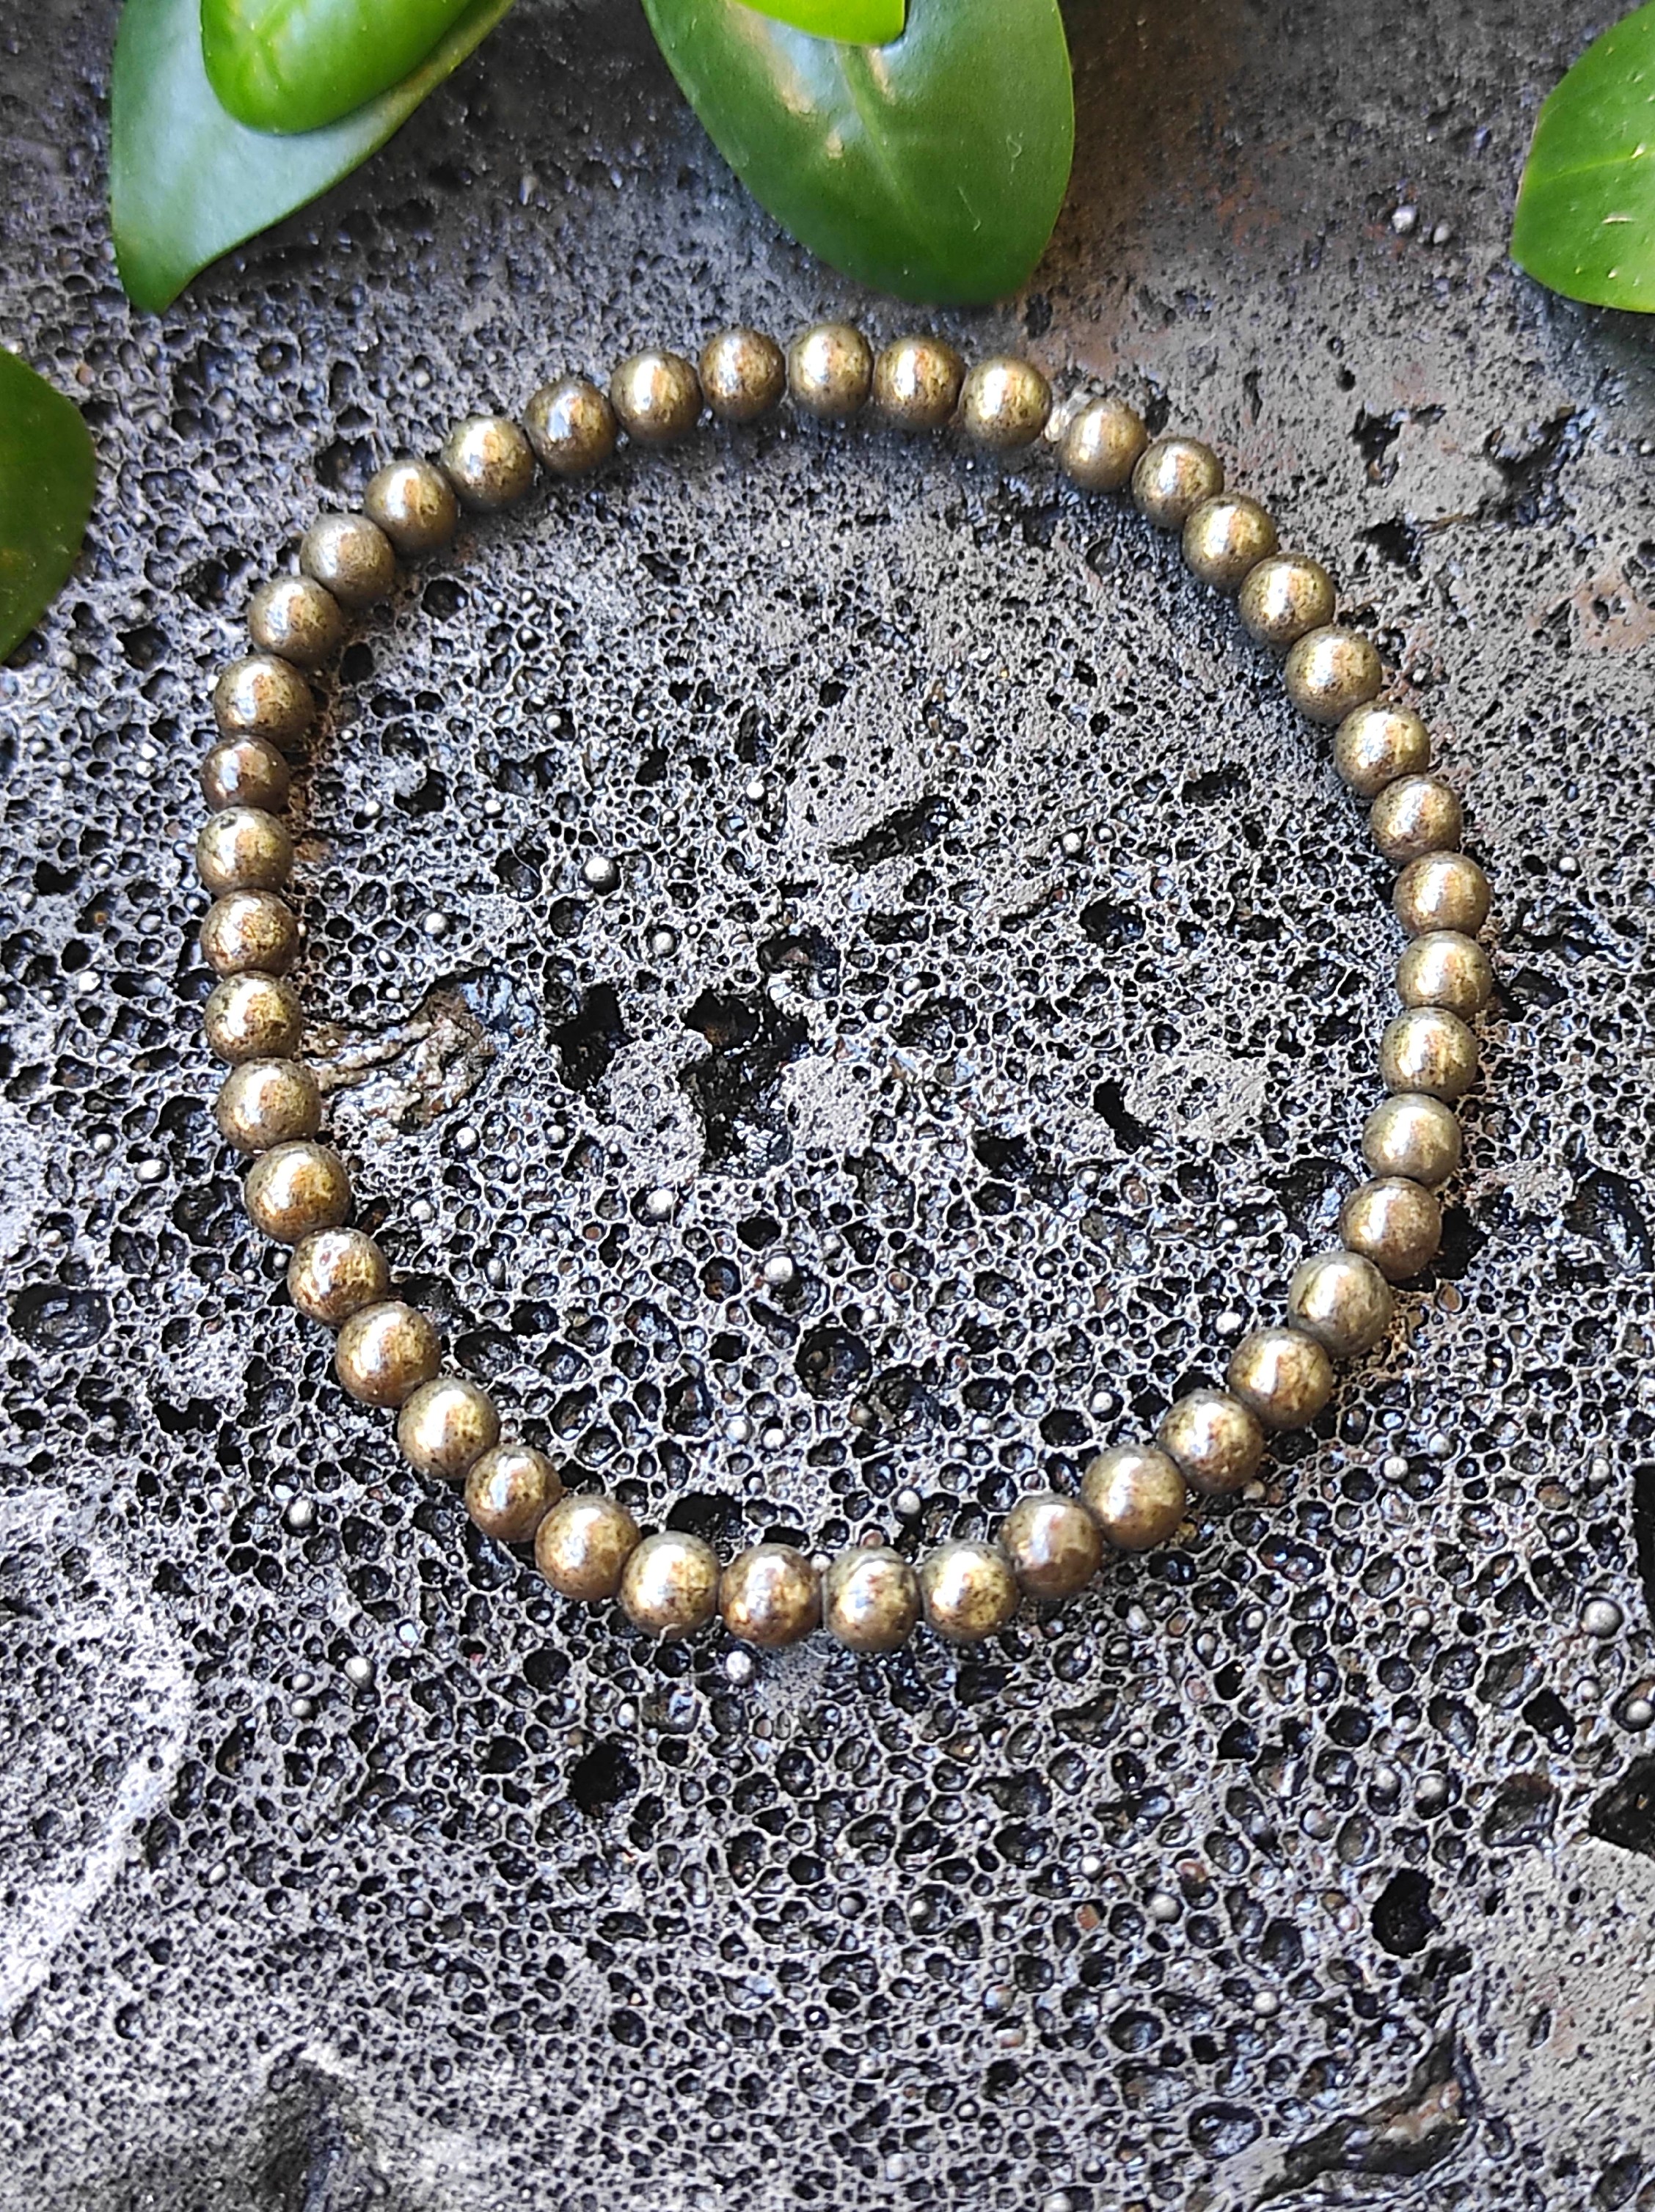 BLESSING CRYSTAL Pyrite Cluster Rough (20 TO 50 Gram) & Bead Bracelet 8mm,  Genuine Crystal Pyrite